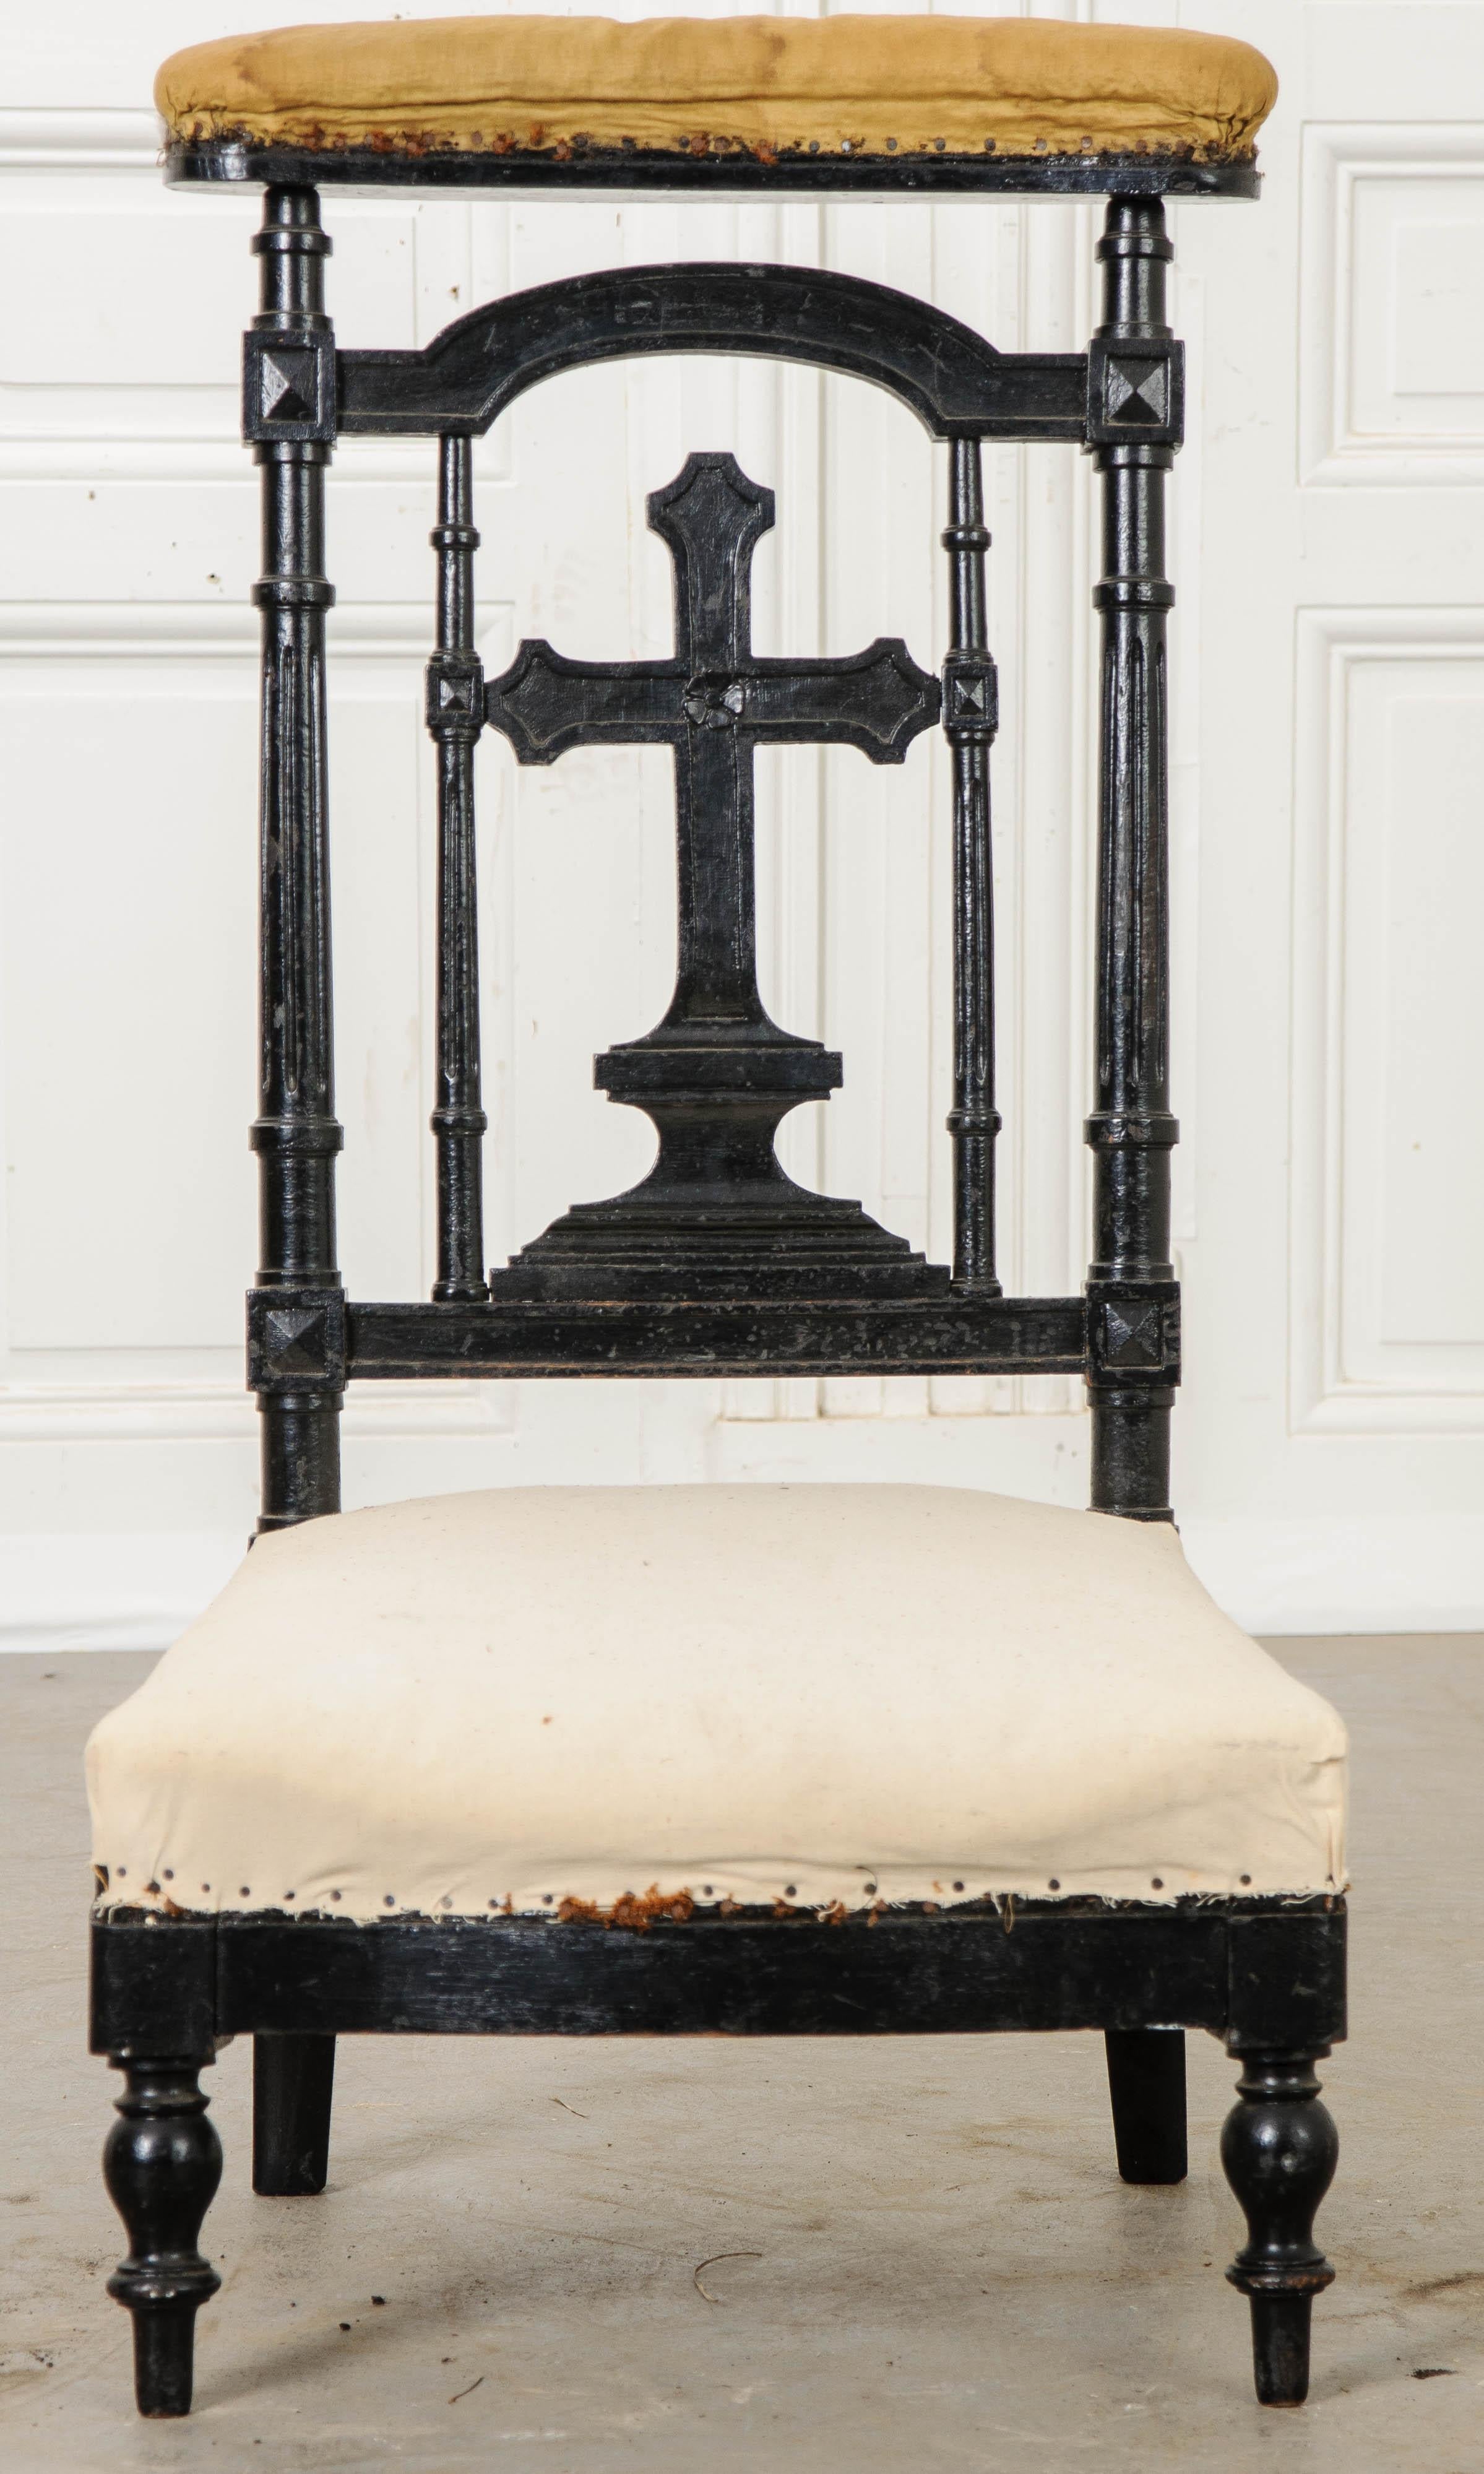 A delightful 19th century French prie dieu. The frame is made of hardwood that has been ebonized. This exceptional finish has become patinated over the decades, exposing some of the hardwood beneath. A beautiful carved cross can be found below the